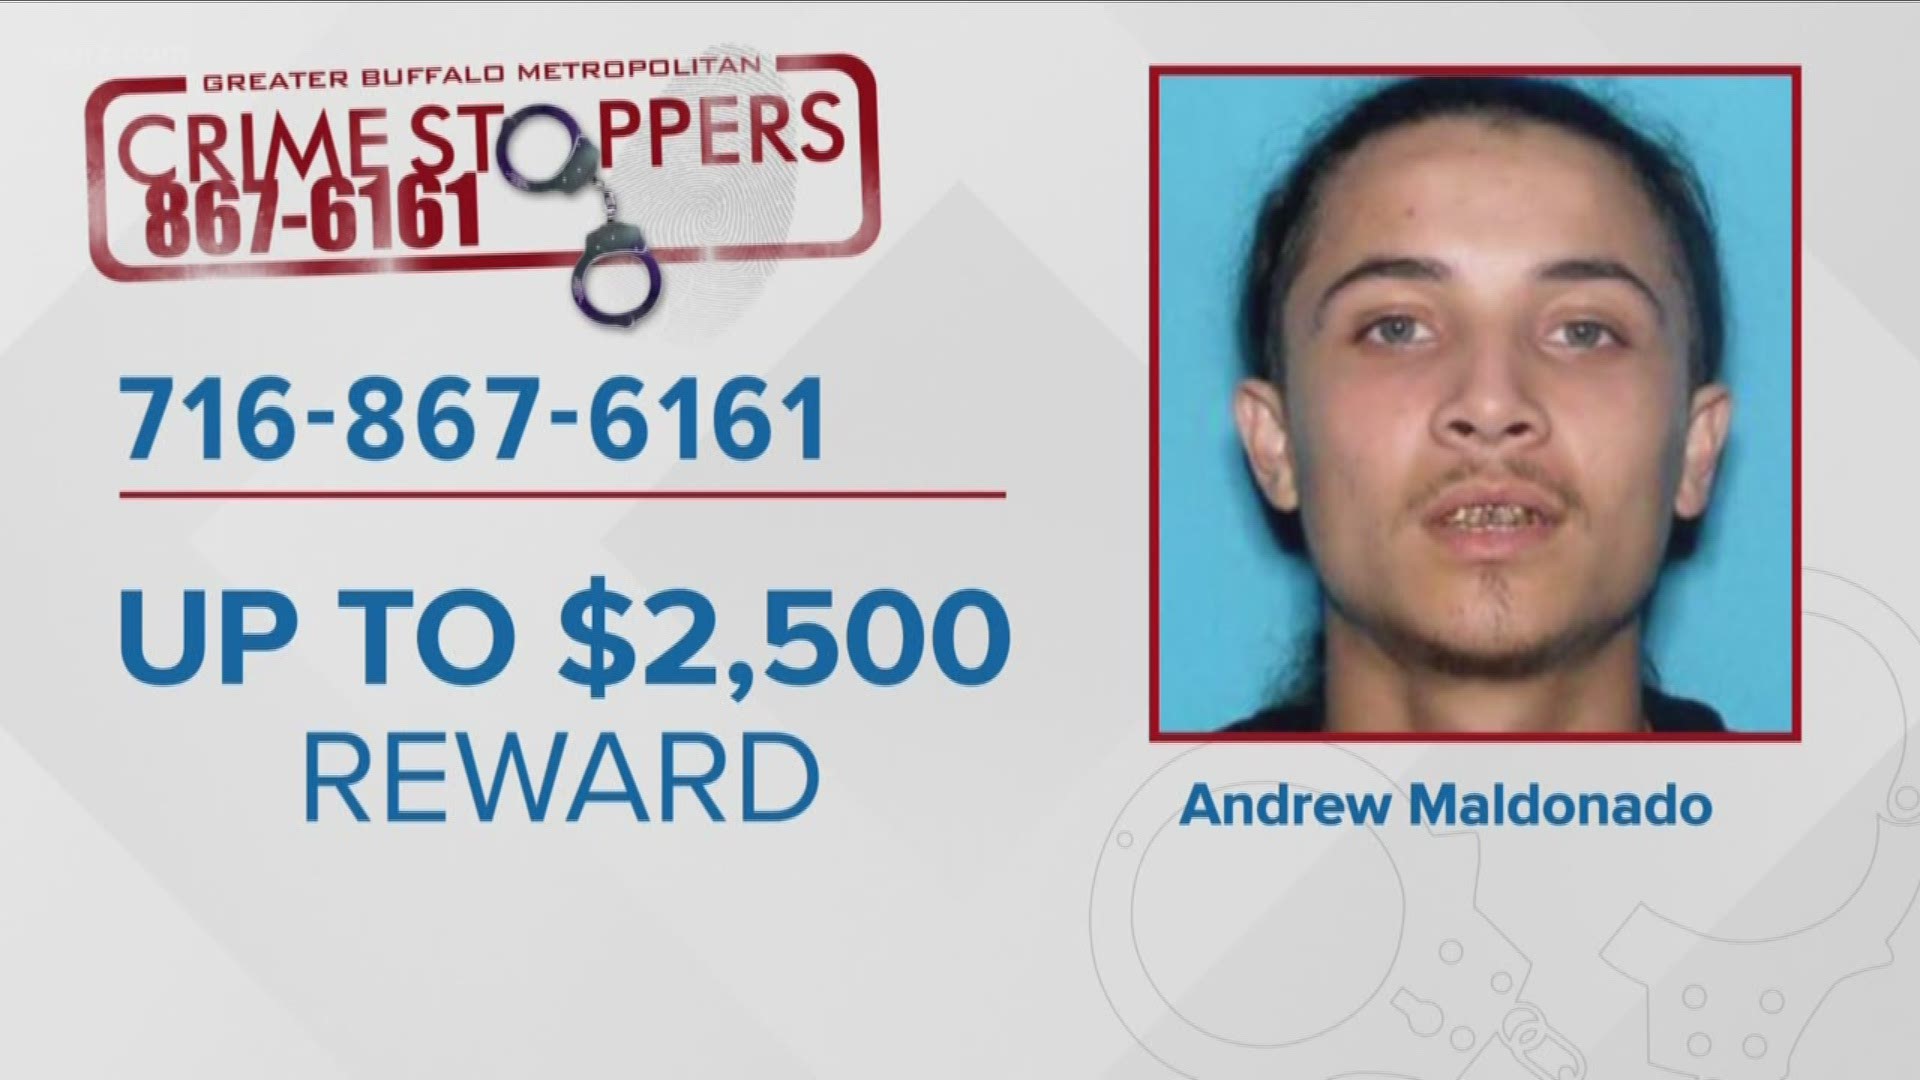 Florida man wanted for murder may be in Buffalo.
Andrew Maldonado is wanted out of Florida for murder.